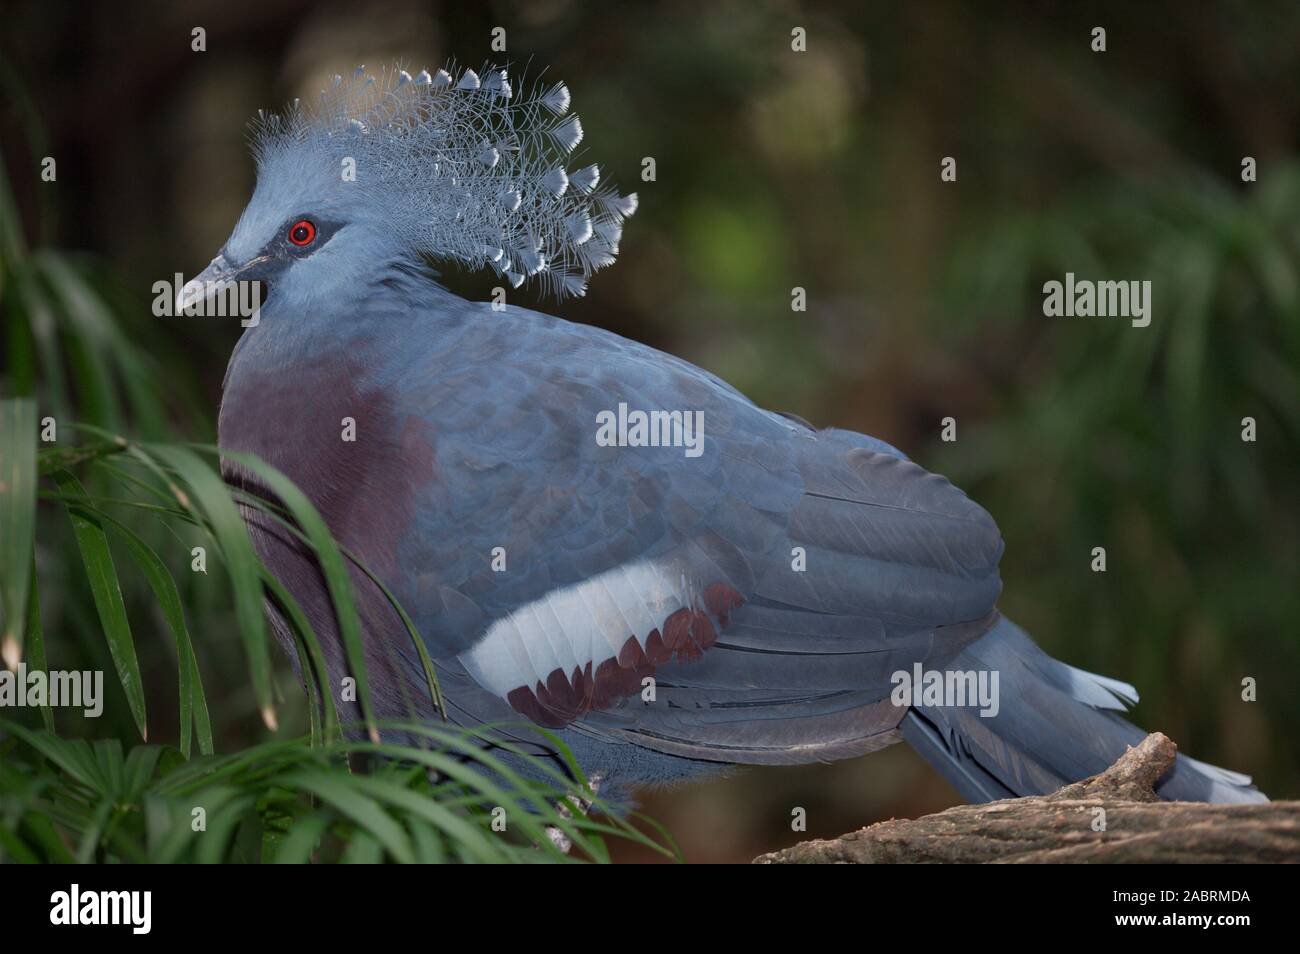 SCHEEPMAKER'S CROWNED PIGEON Goura scheepmakeri Pair nesting. Native to New Guinea. Terrestrial, ground living in daylight. Perch in trees at night. Stock Photo